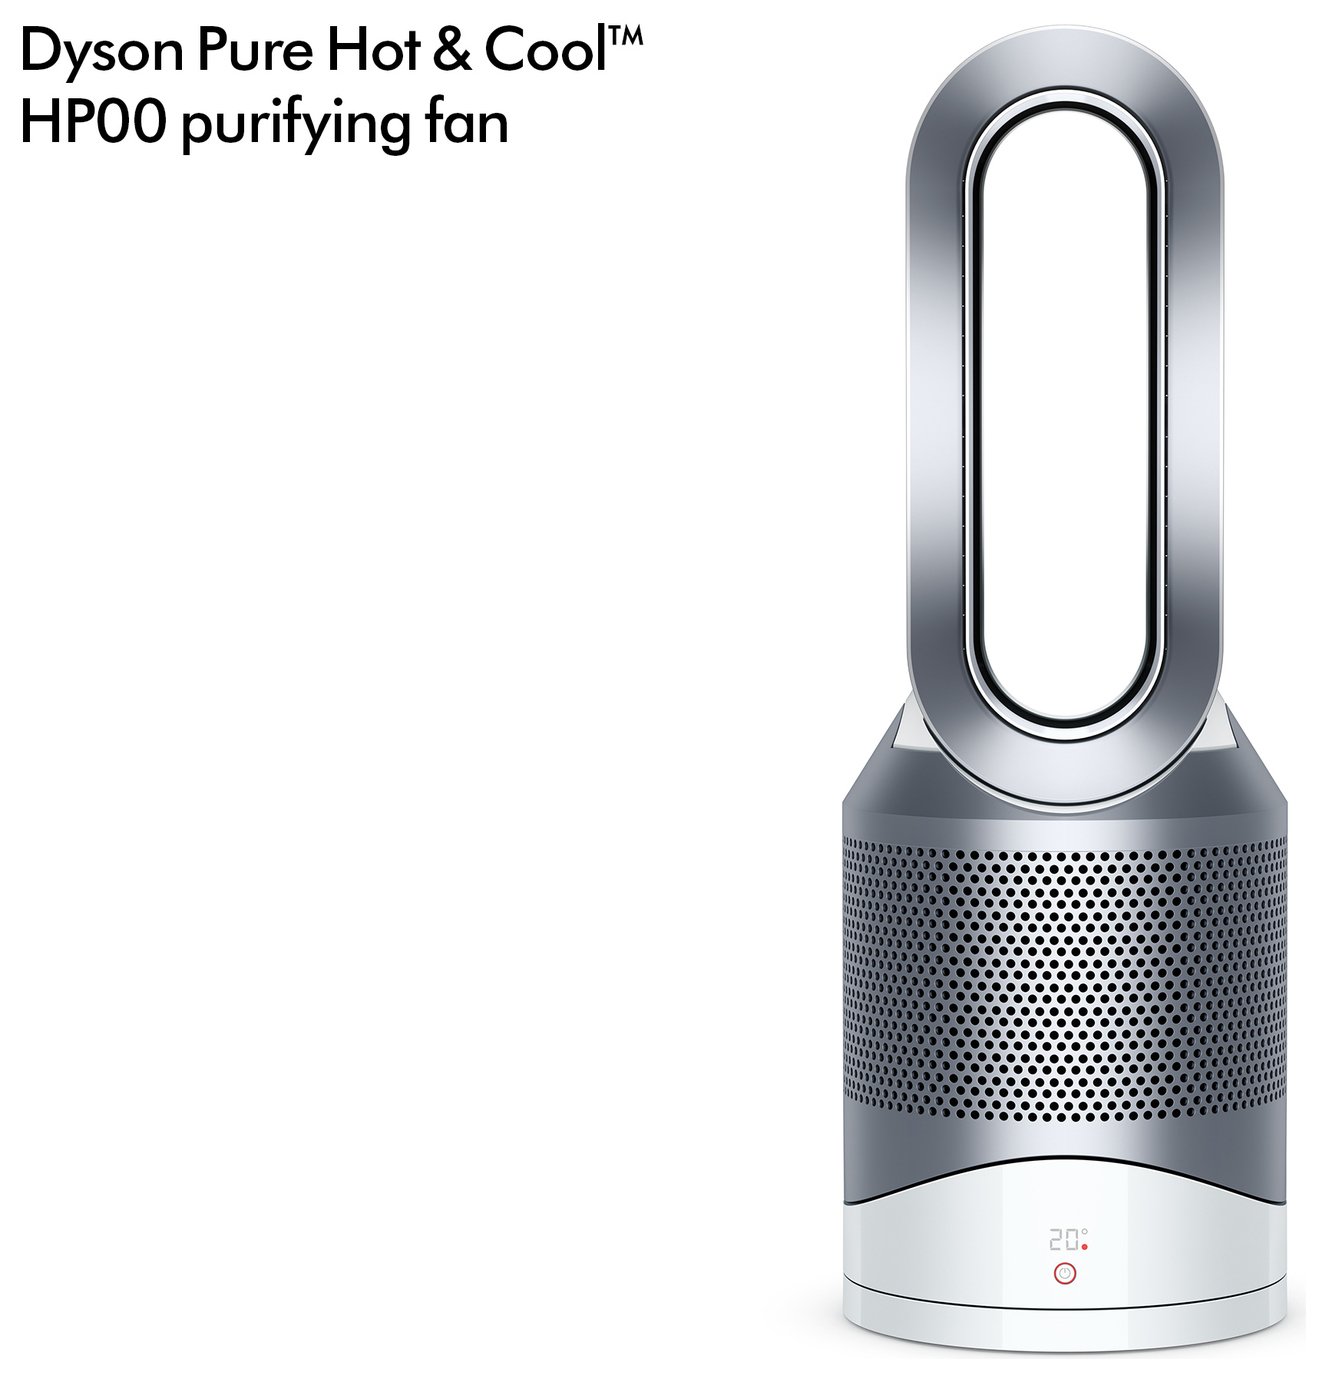 Dyson pure Hot cooL